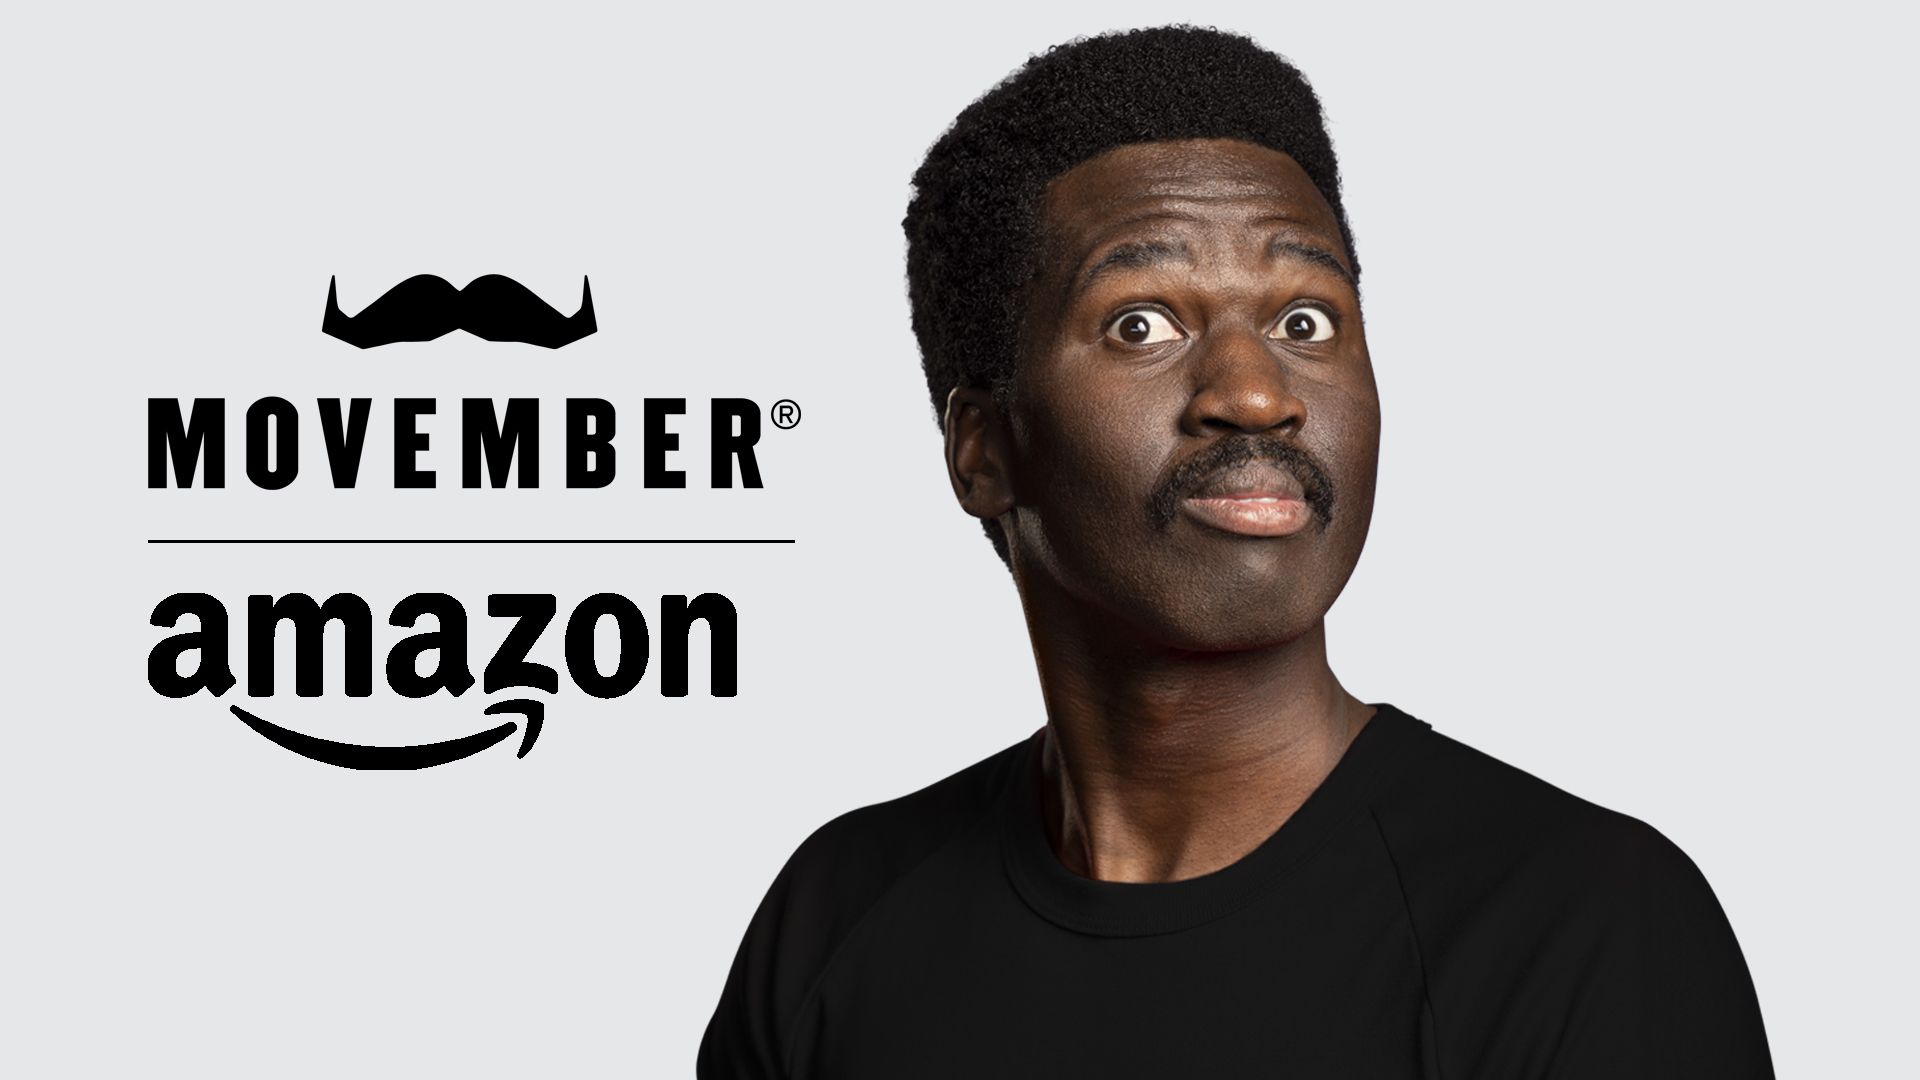 Stylised photo of a man with a superb moustache looking to camera. The words "Movember" and "Amazon" are superimposed over a starry background.